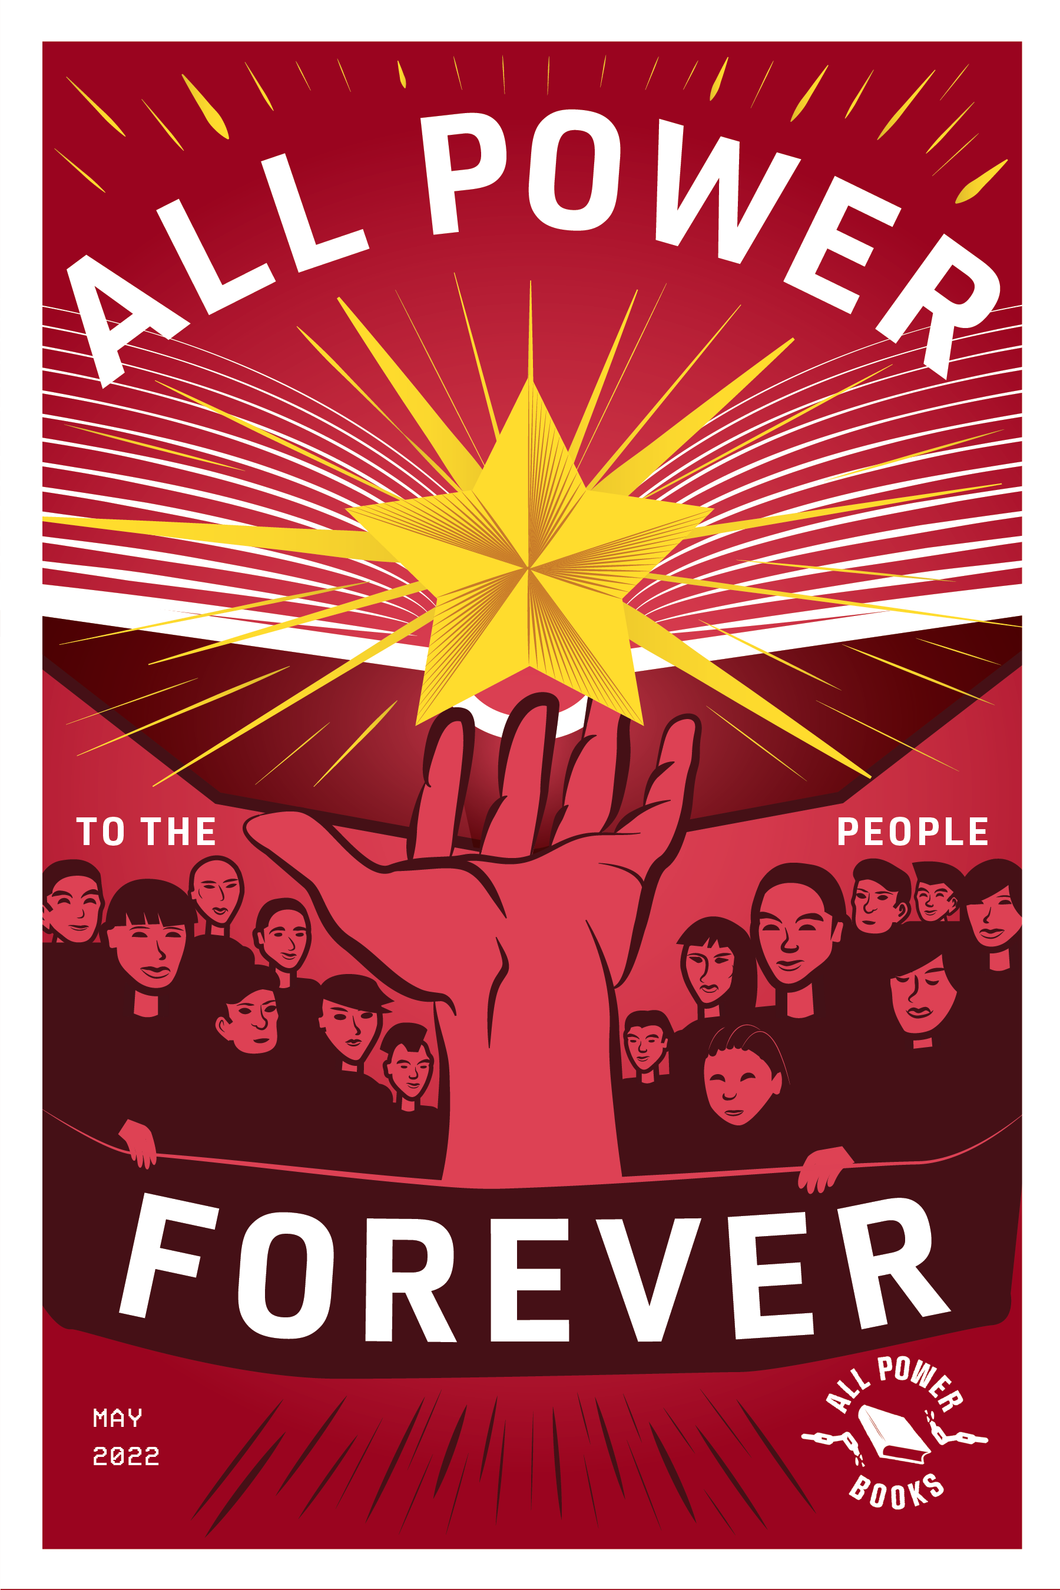 May 2022 Print - All Power Forever